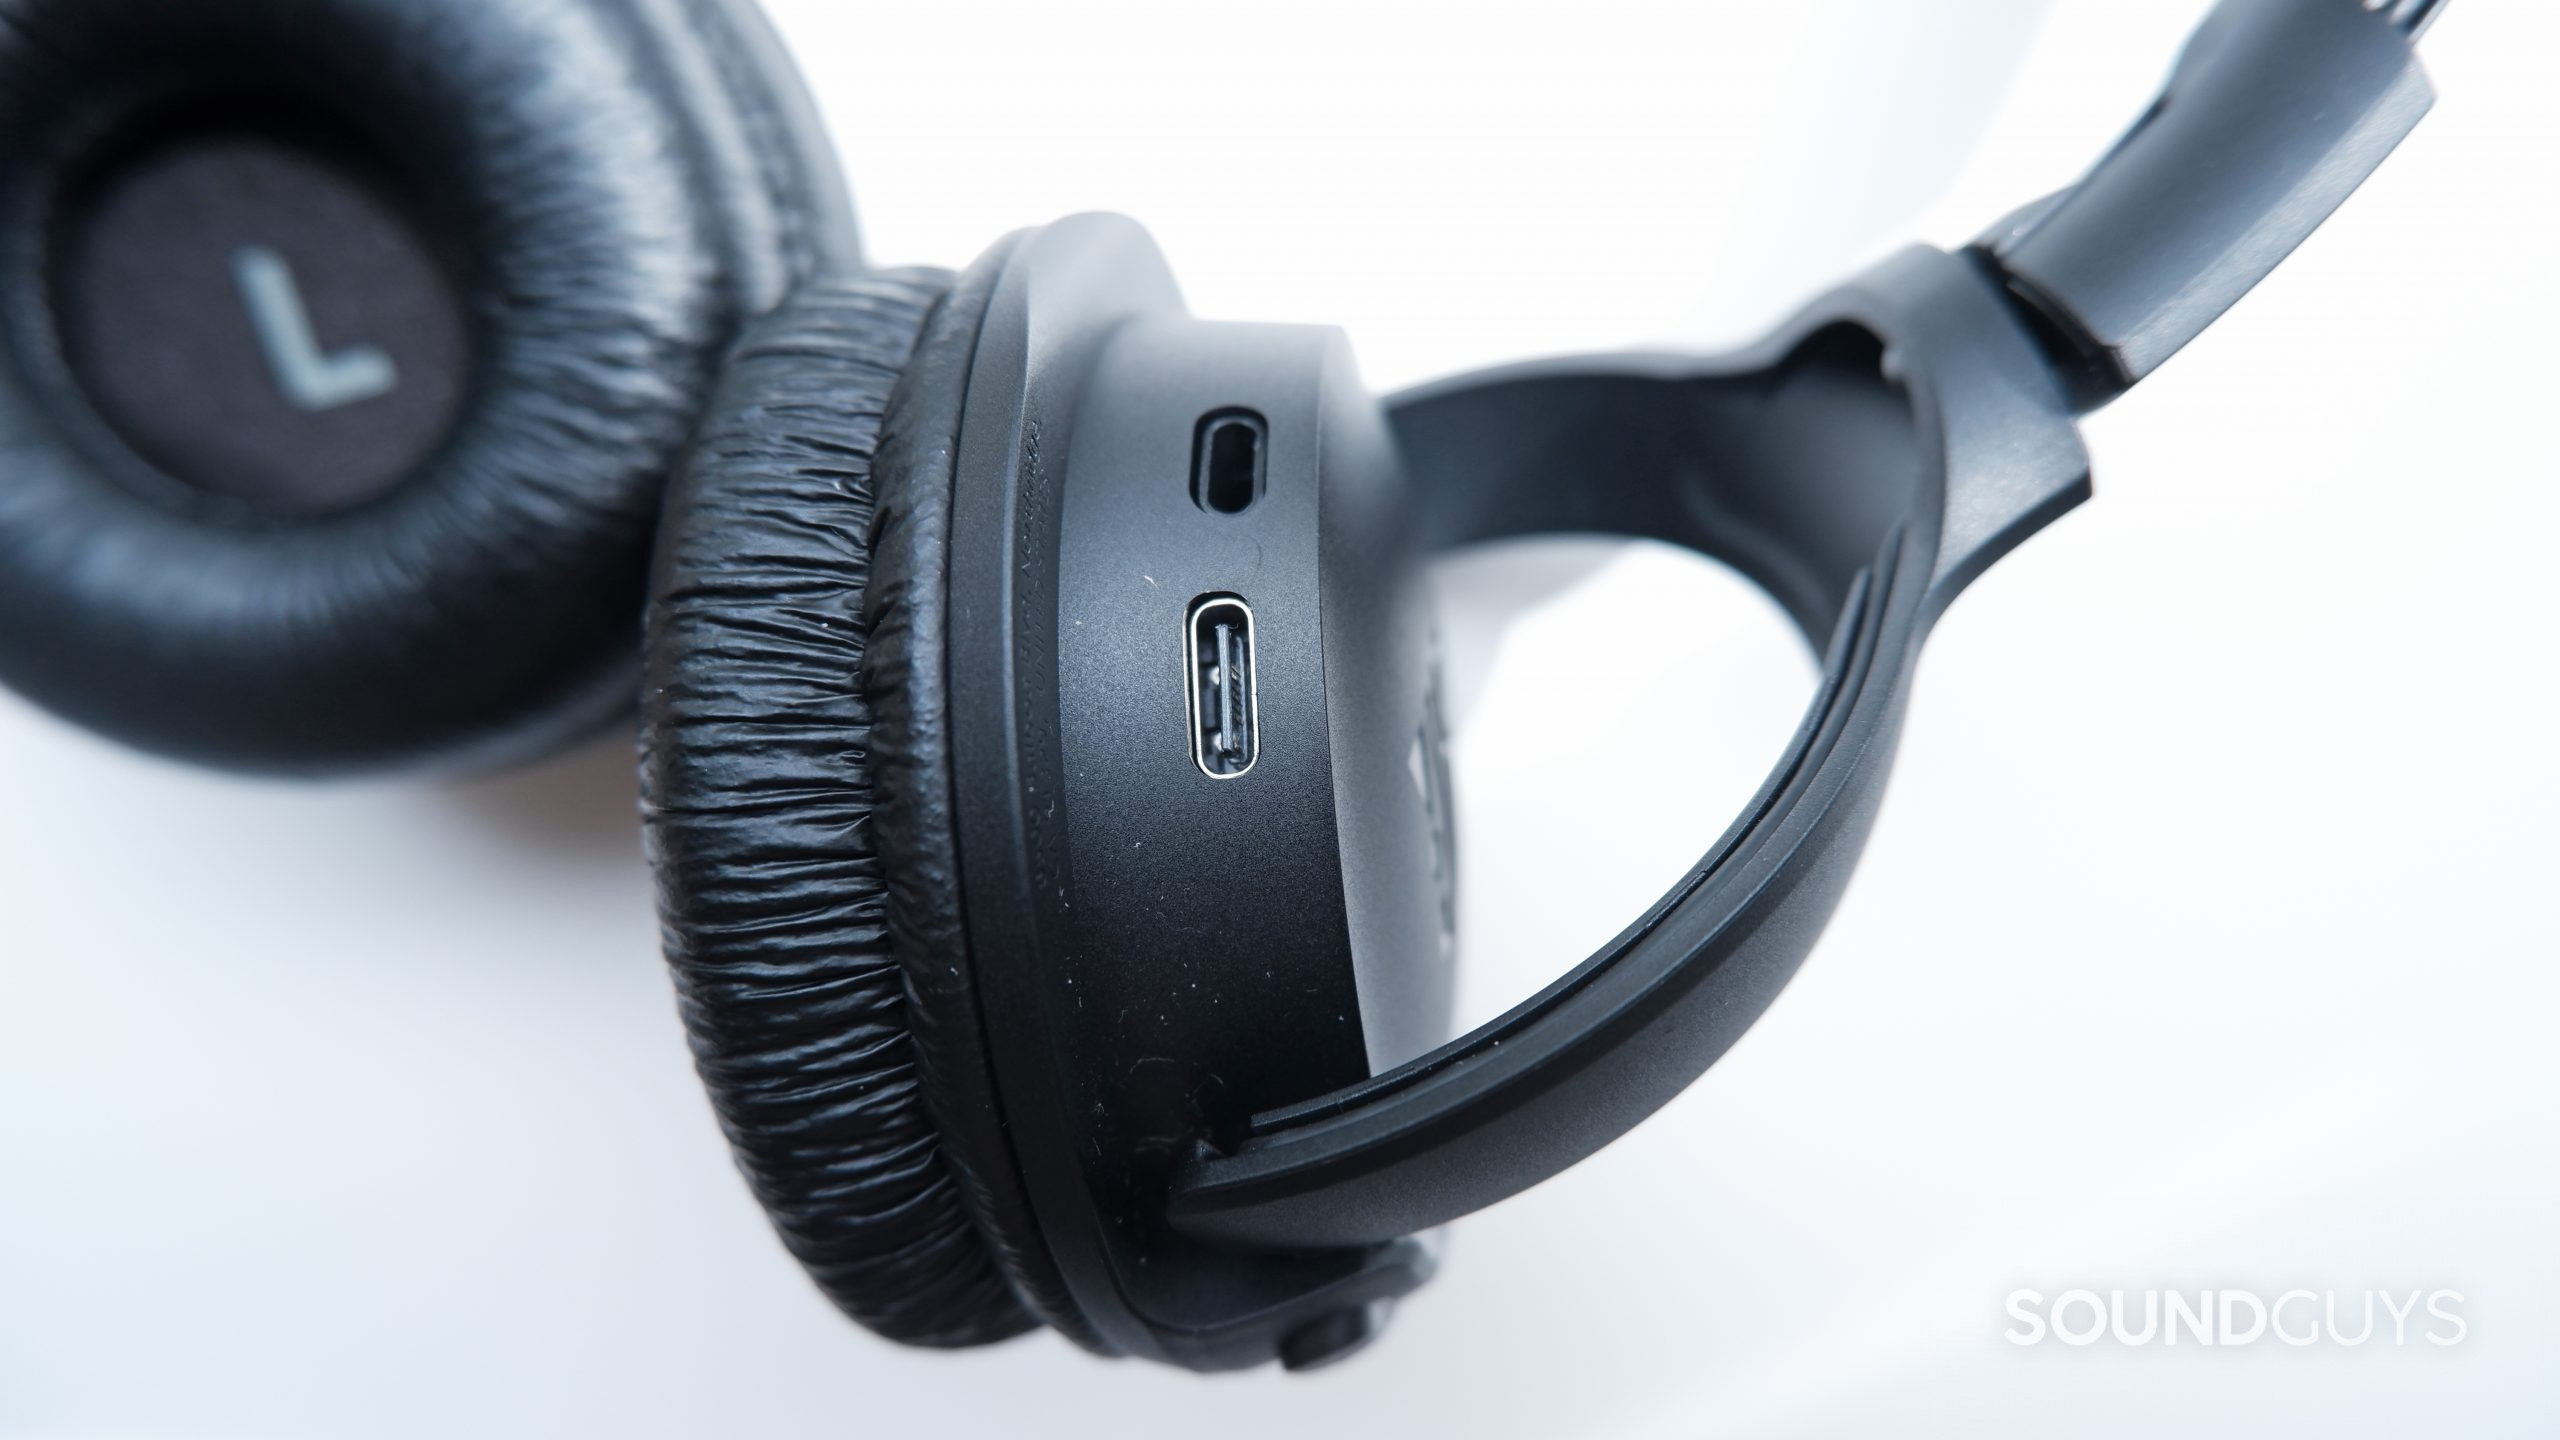 The USB-C port on the right ear cup of the JBL Tune 510BT.